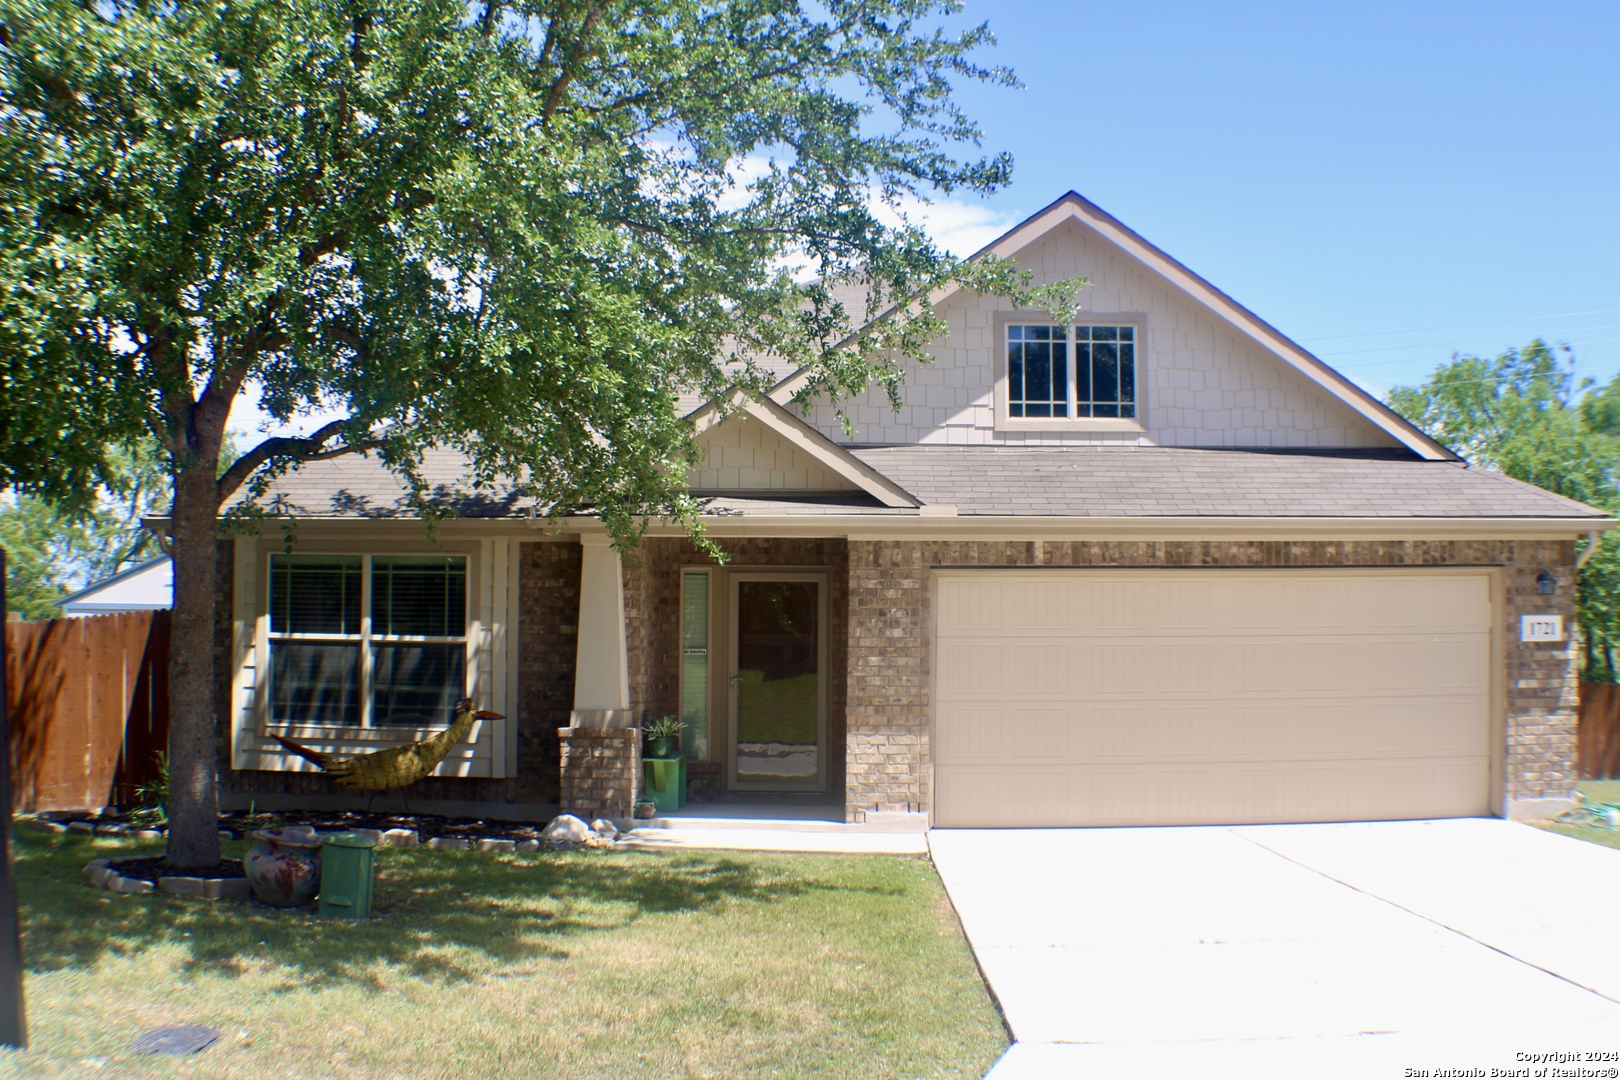 Photo of 1721 Sunspur Rd in New Braunfels, TX